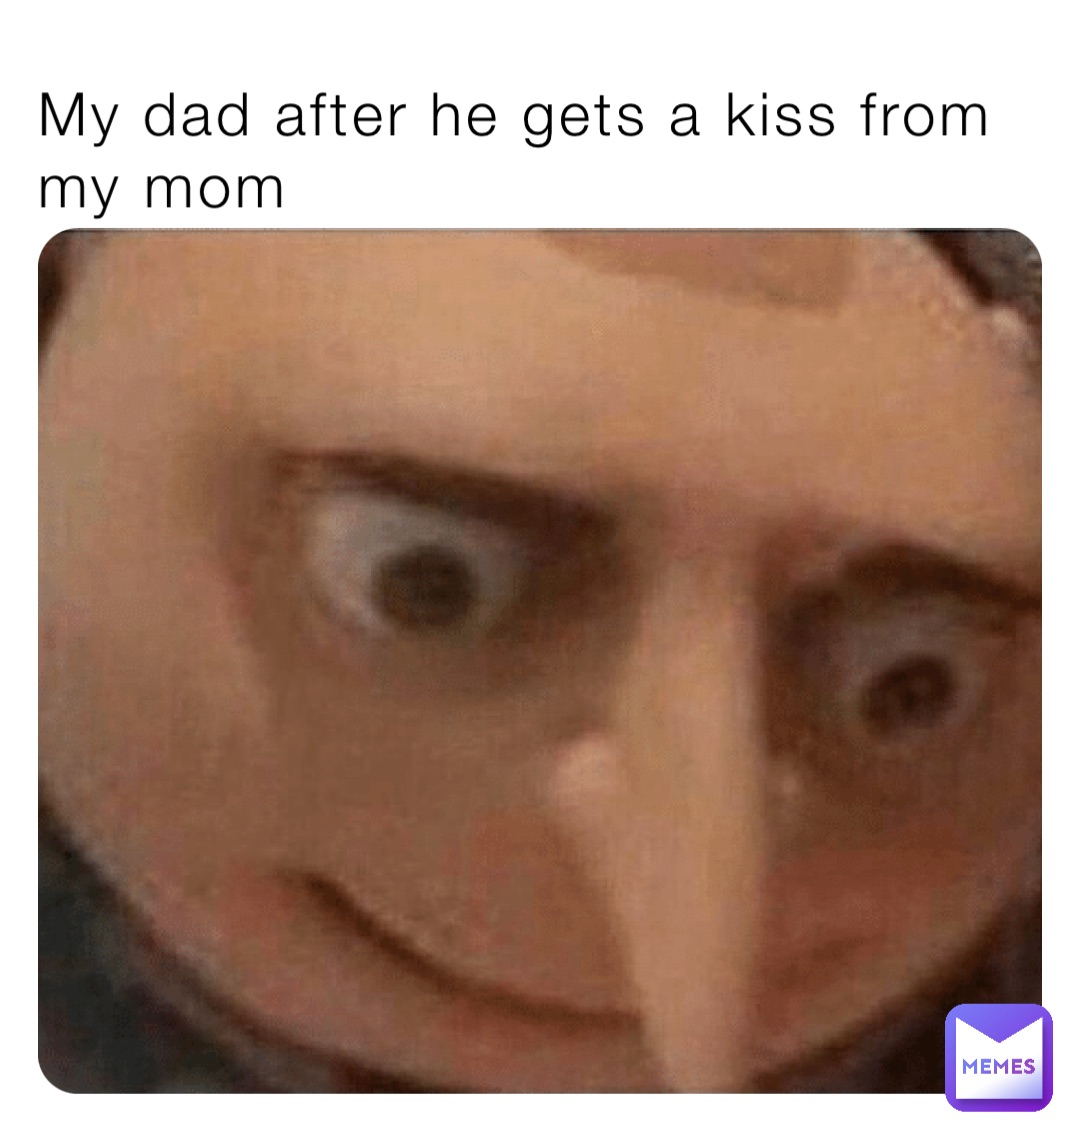 My dad after he gets a kiss from my mom